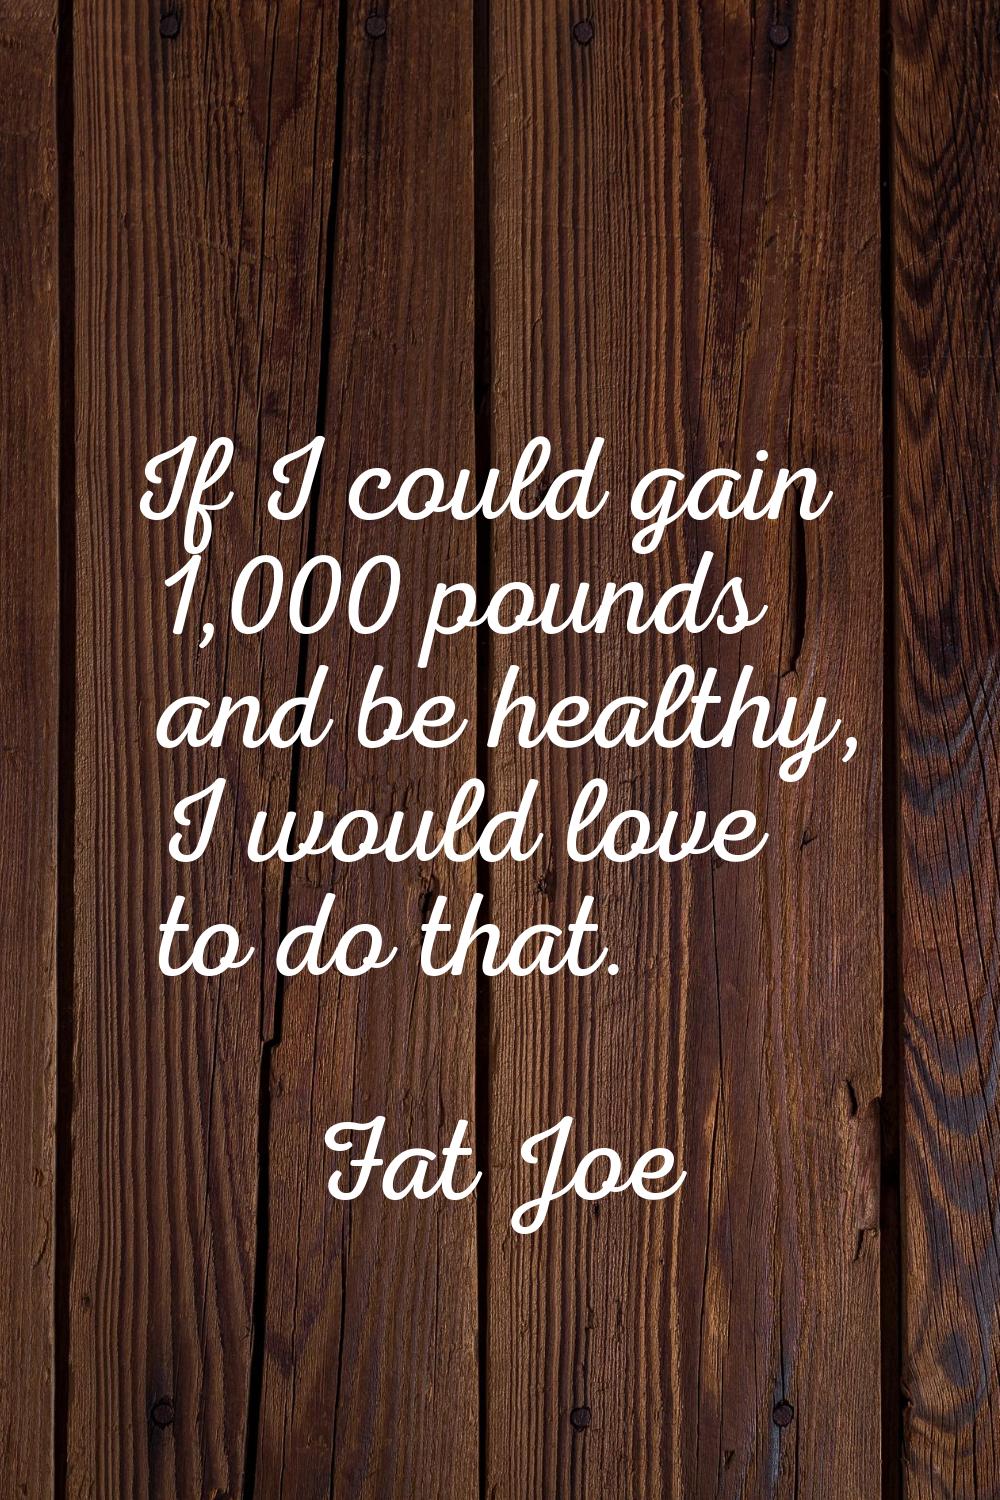 If I could gain 1,000 pounds and be healthy, I would love to do that.